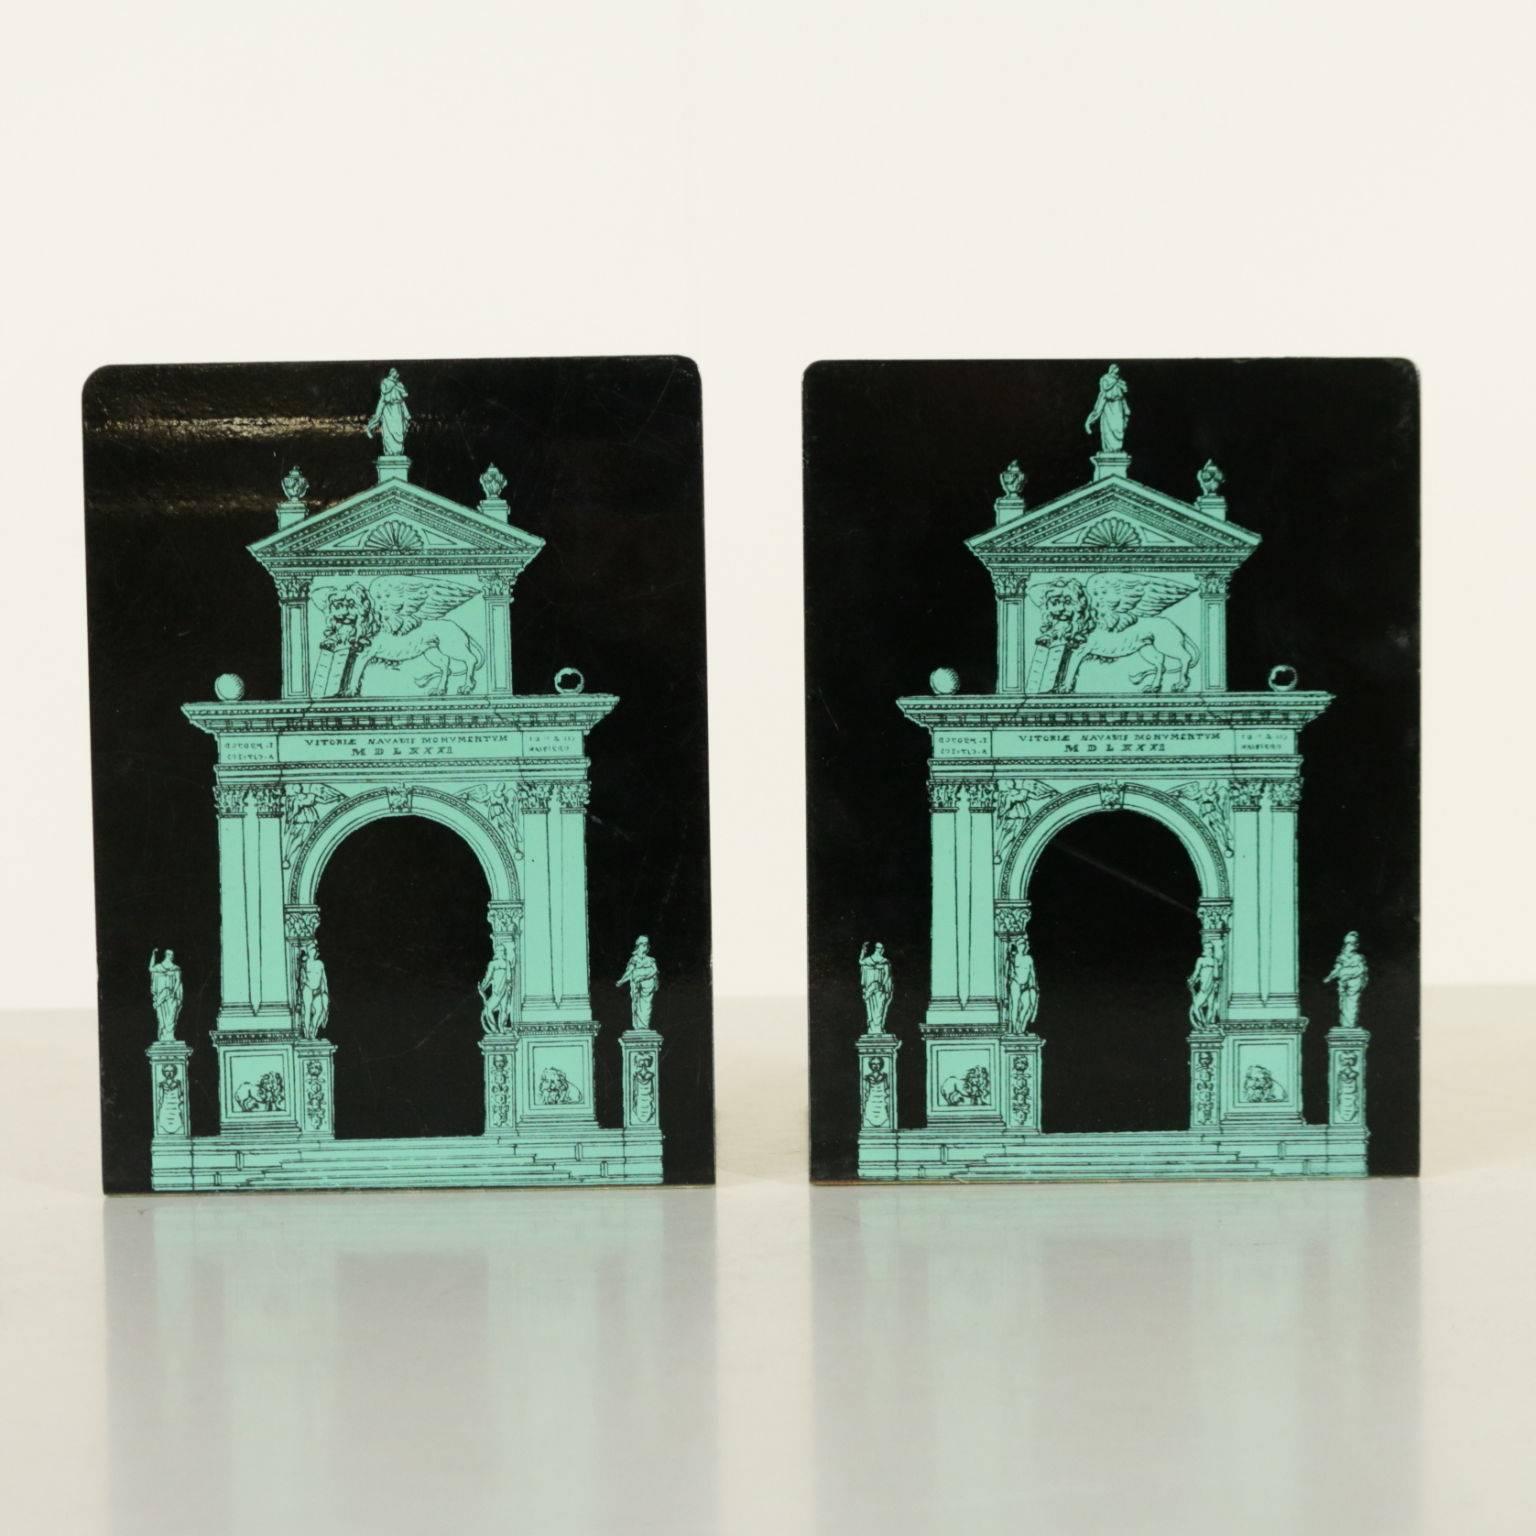 Pair of enamelled metal bookends designed by Piero Fornasetti with screen painted decorations. Manufacturing brand under the base. Manufactured in Milano, Italy, 1960s.